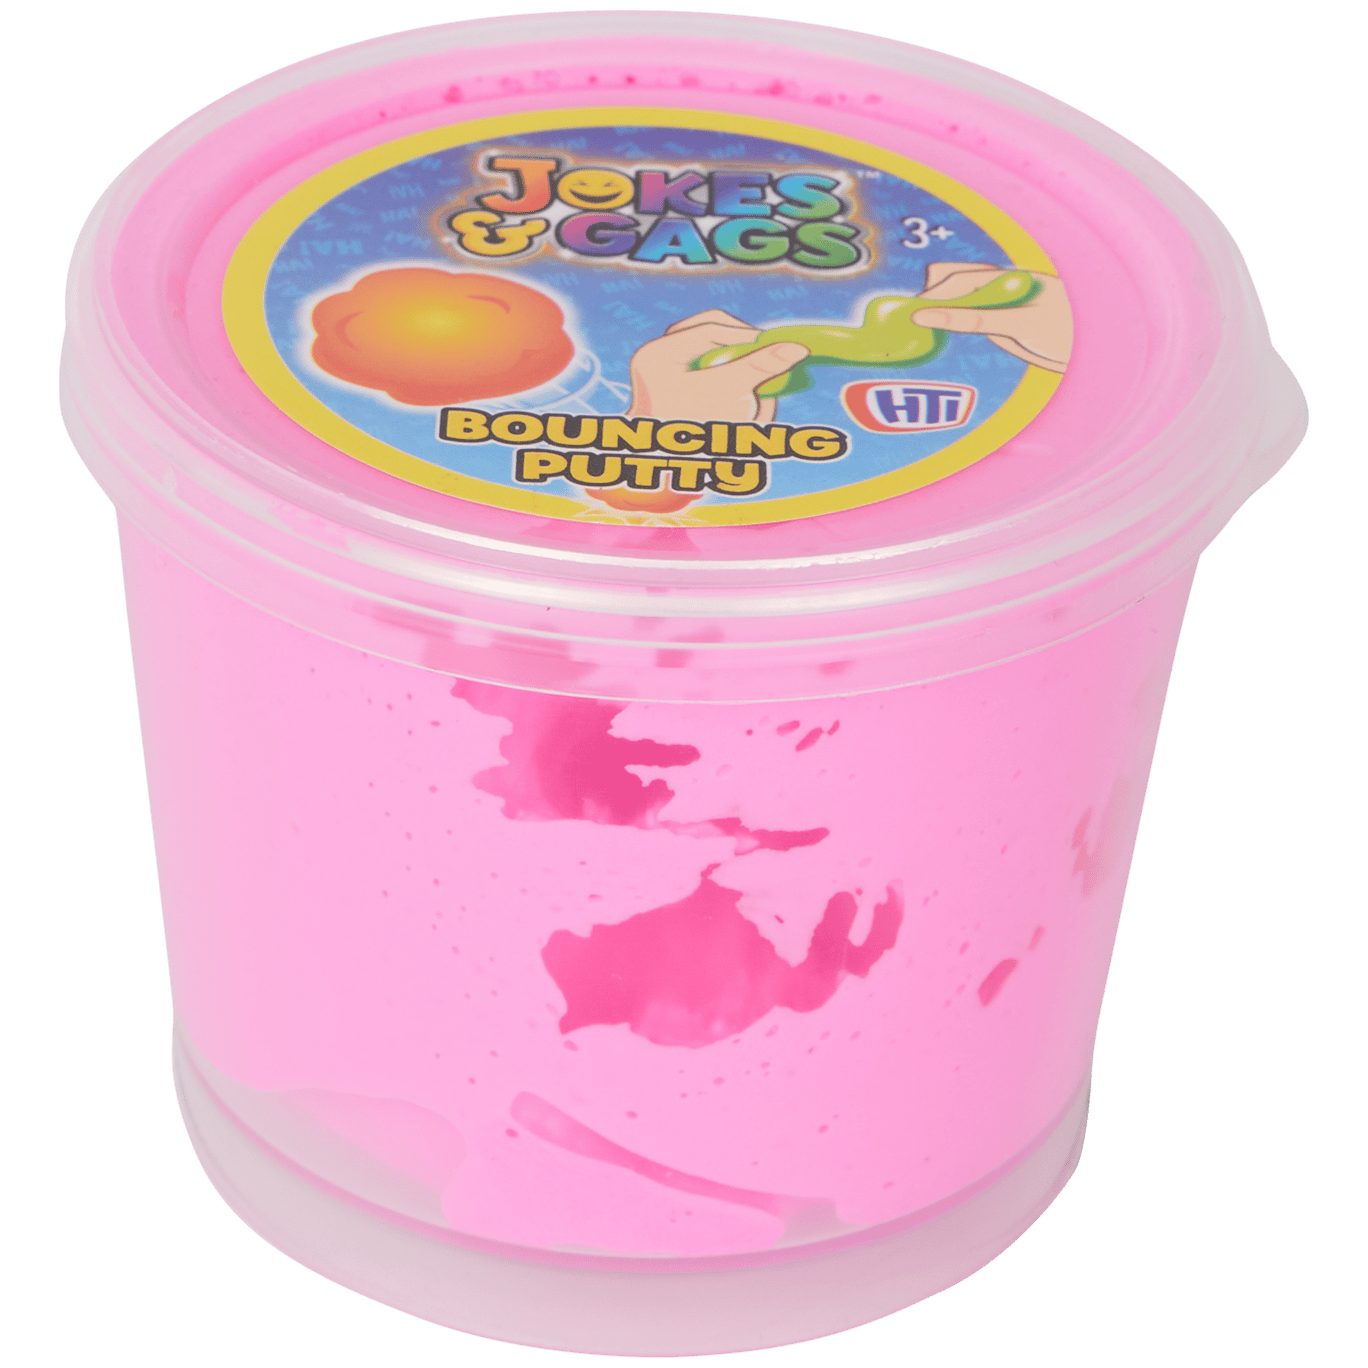 dwaas kalf Ananiver Bouncing putty | Action.com